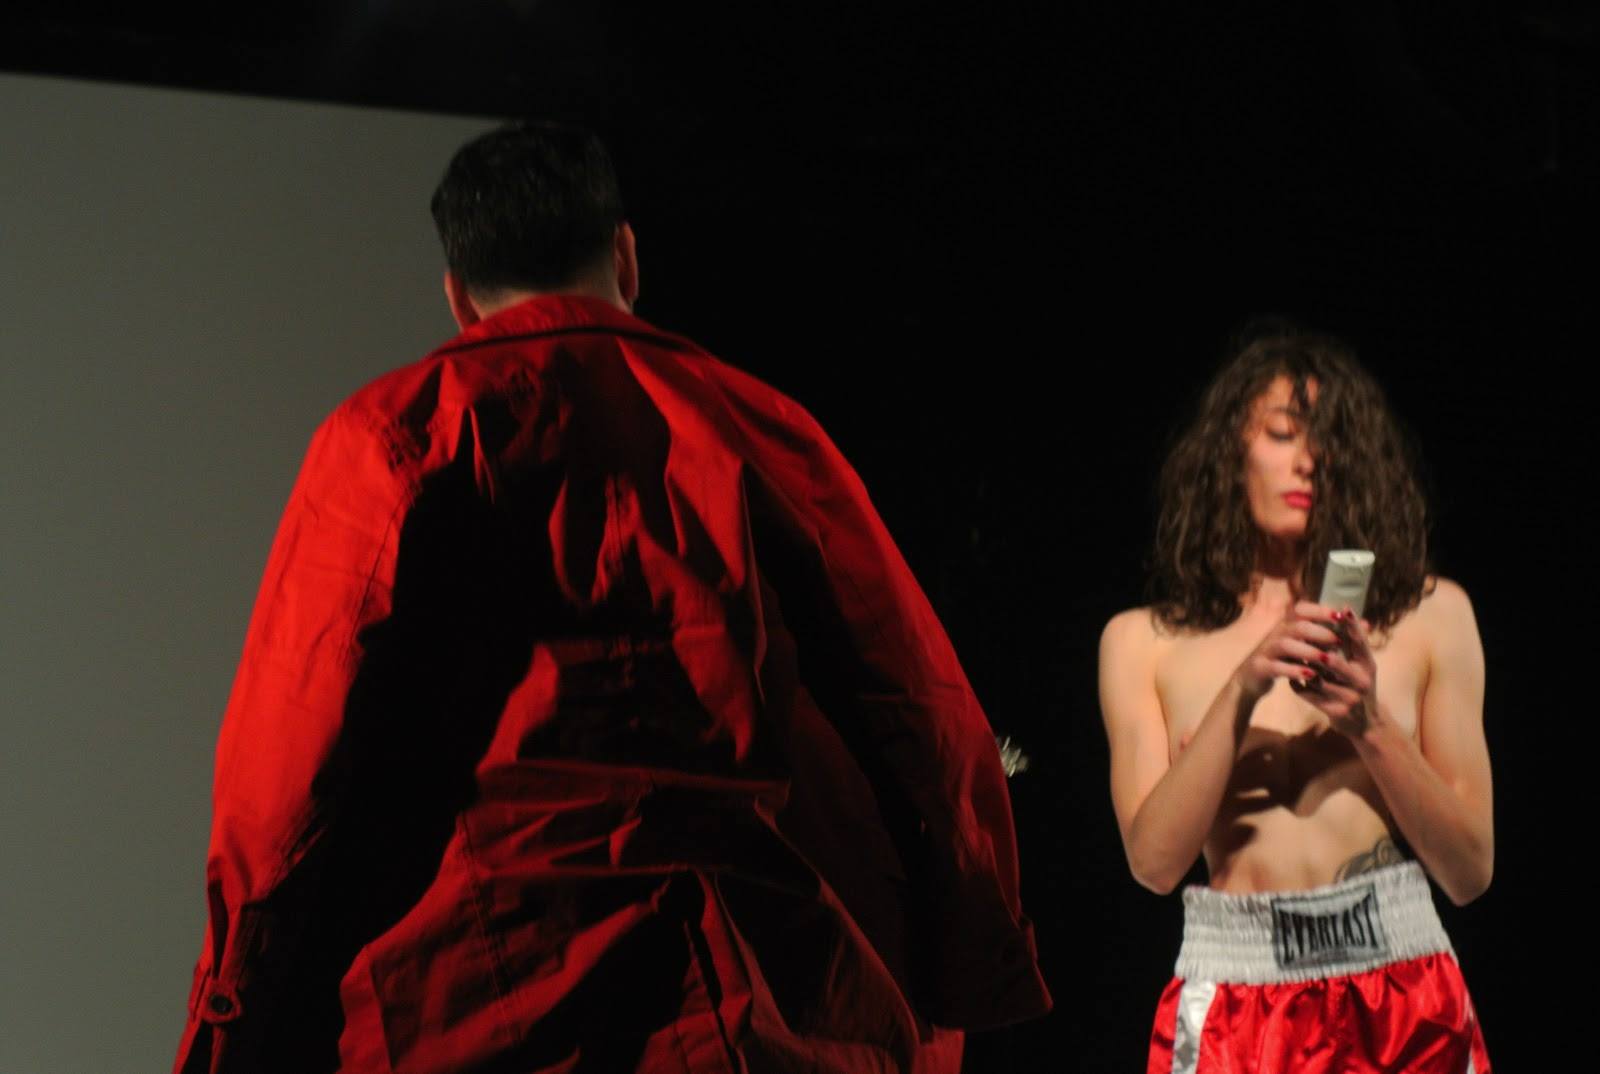 Antistatic Festival for Contemporary Dance and Performance